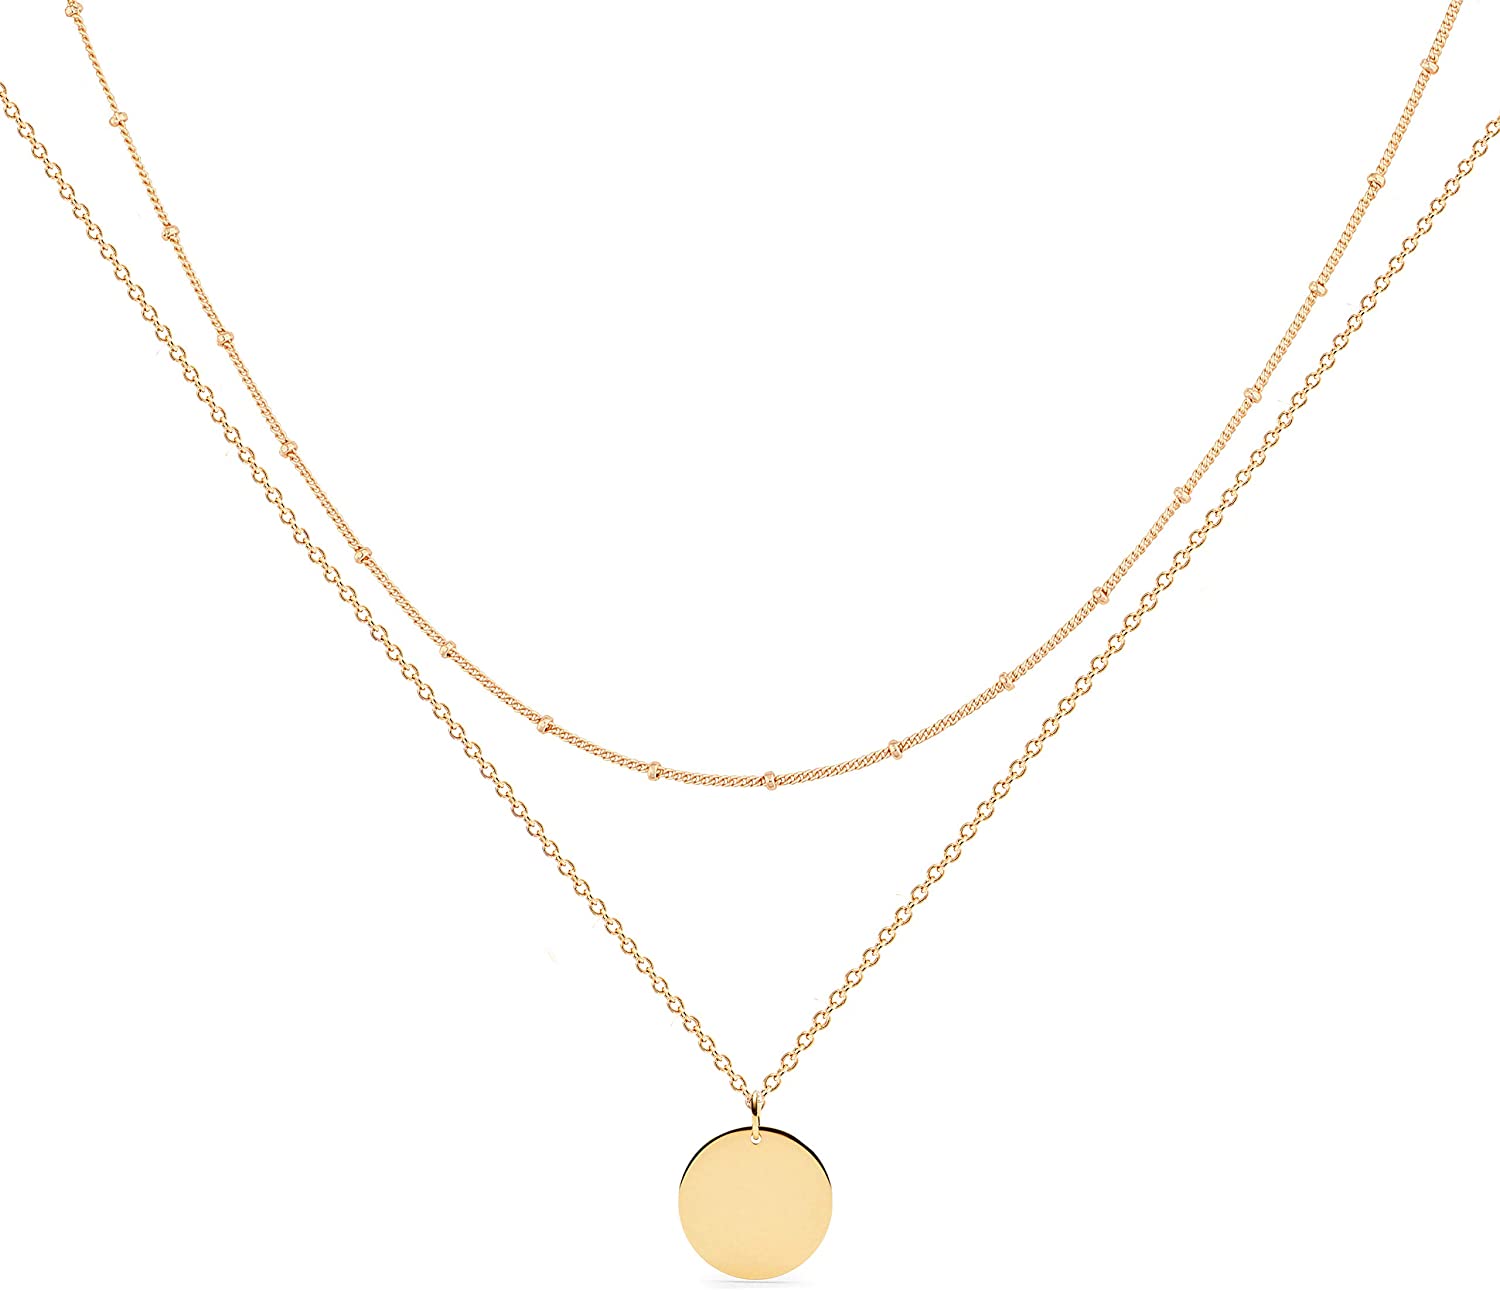 Layered Heart Necklace Pendant Handmade 18K Gold Plated Dainty Gold Choker Arrow Bar Layering Long Necklace for Women